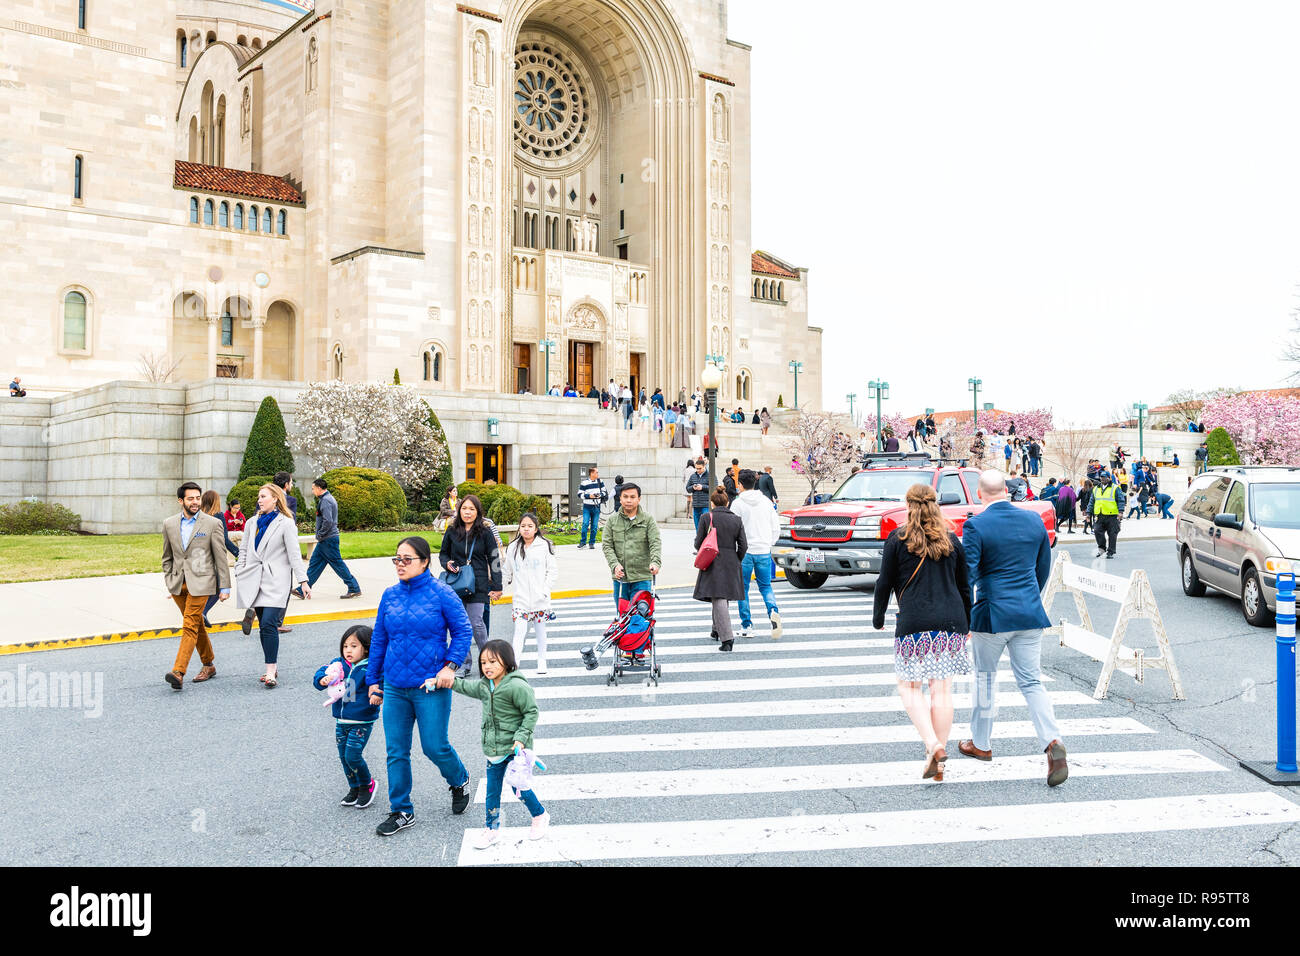 Washington DC, USA - April 1, 2018: People, family, mother, children walking by basilica of the National Shrine of the Immaculate Conception Catholic  Stock Photo